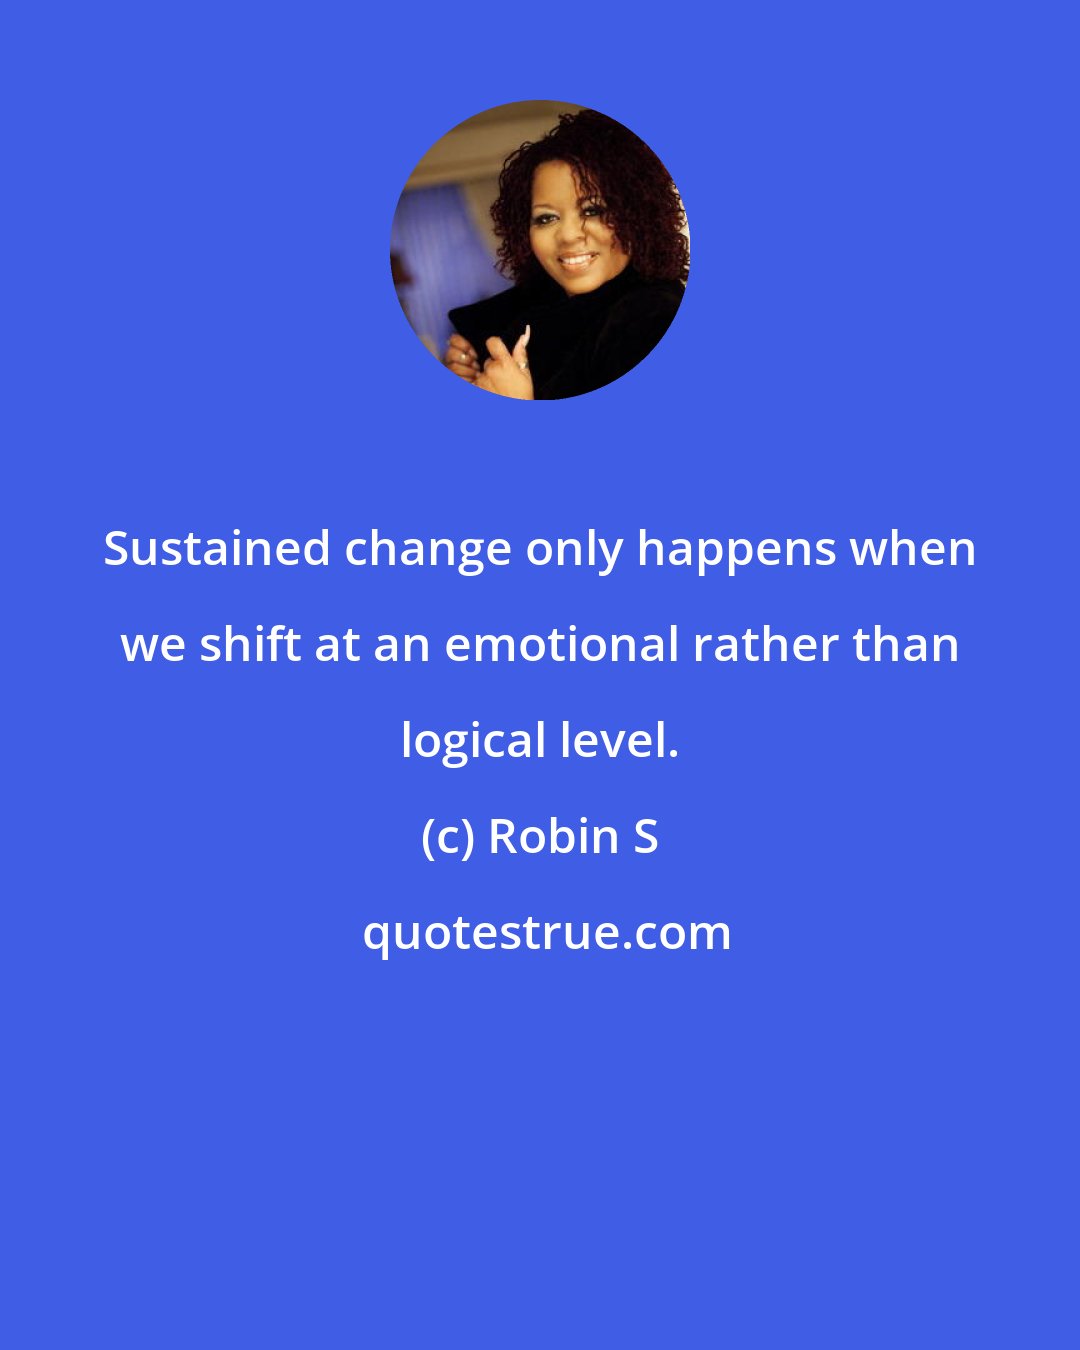 Robin S: Sustained change only happens when we shift at an emotional rather than logical level.